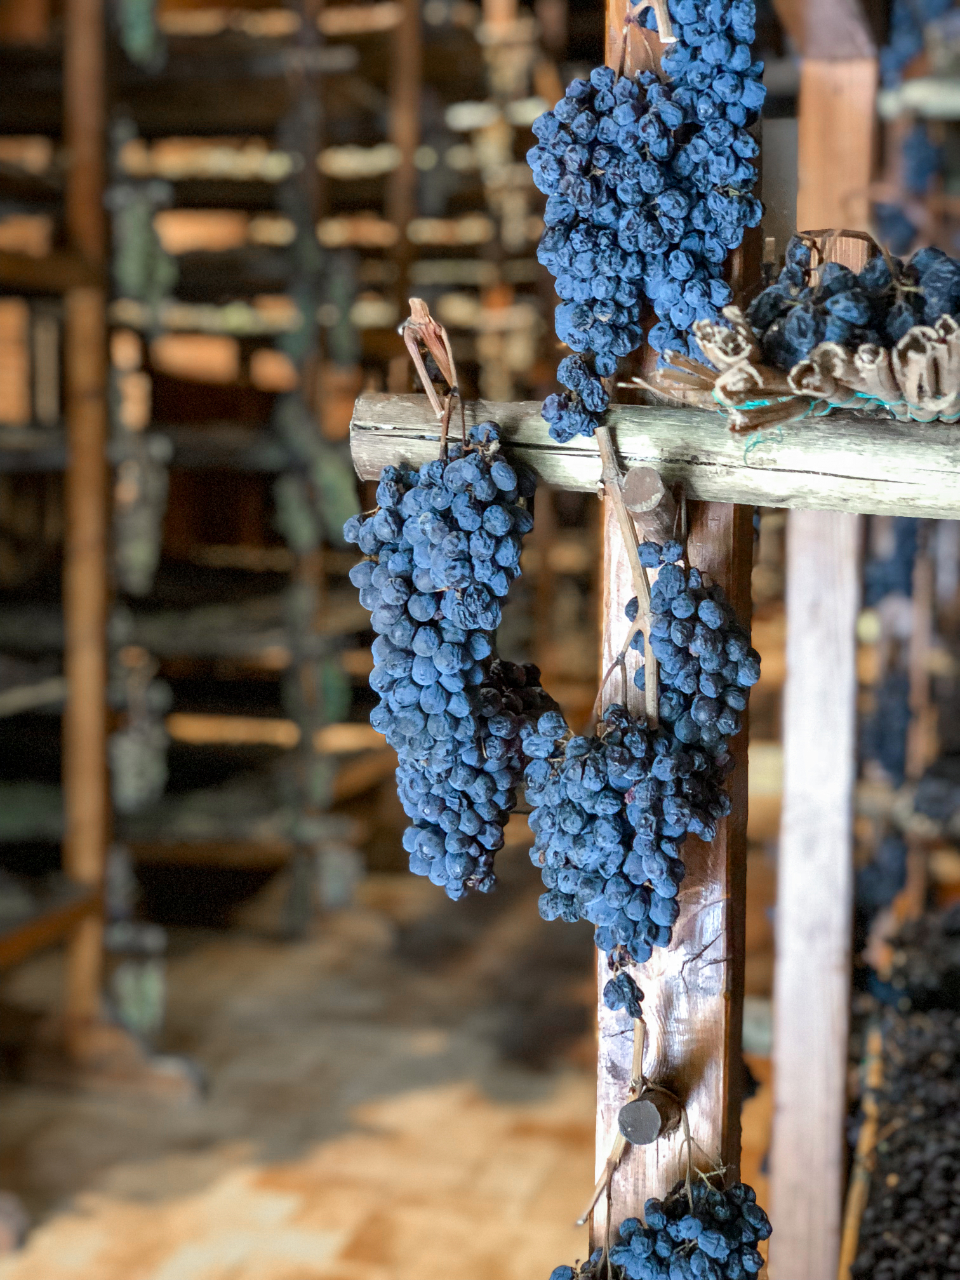 Grapes Drying